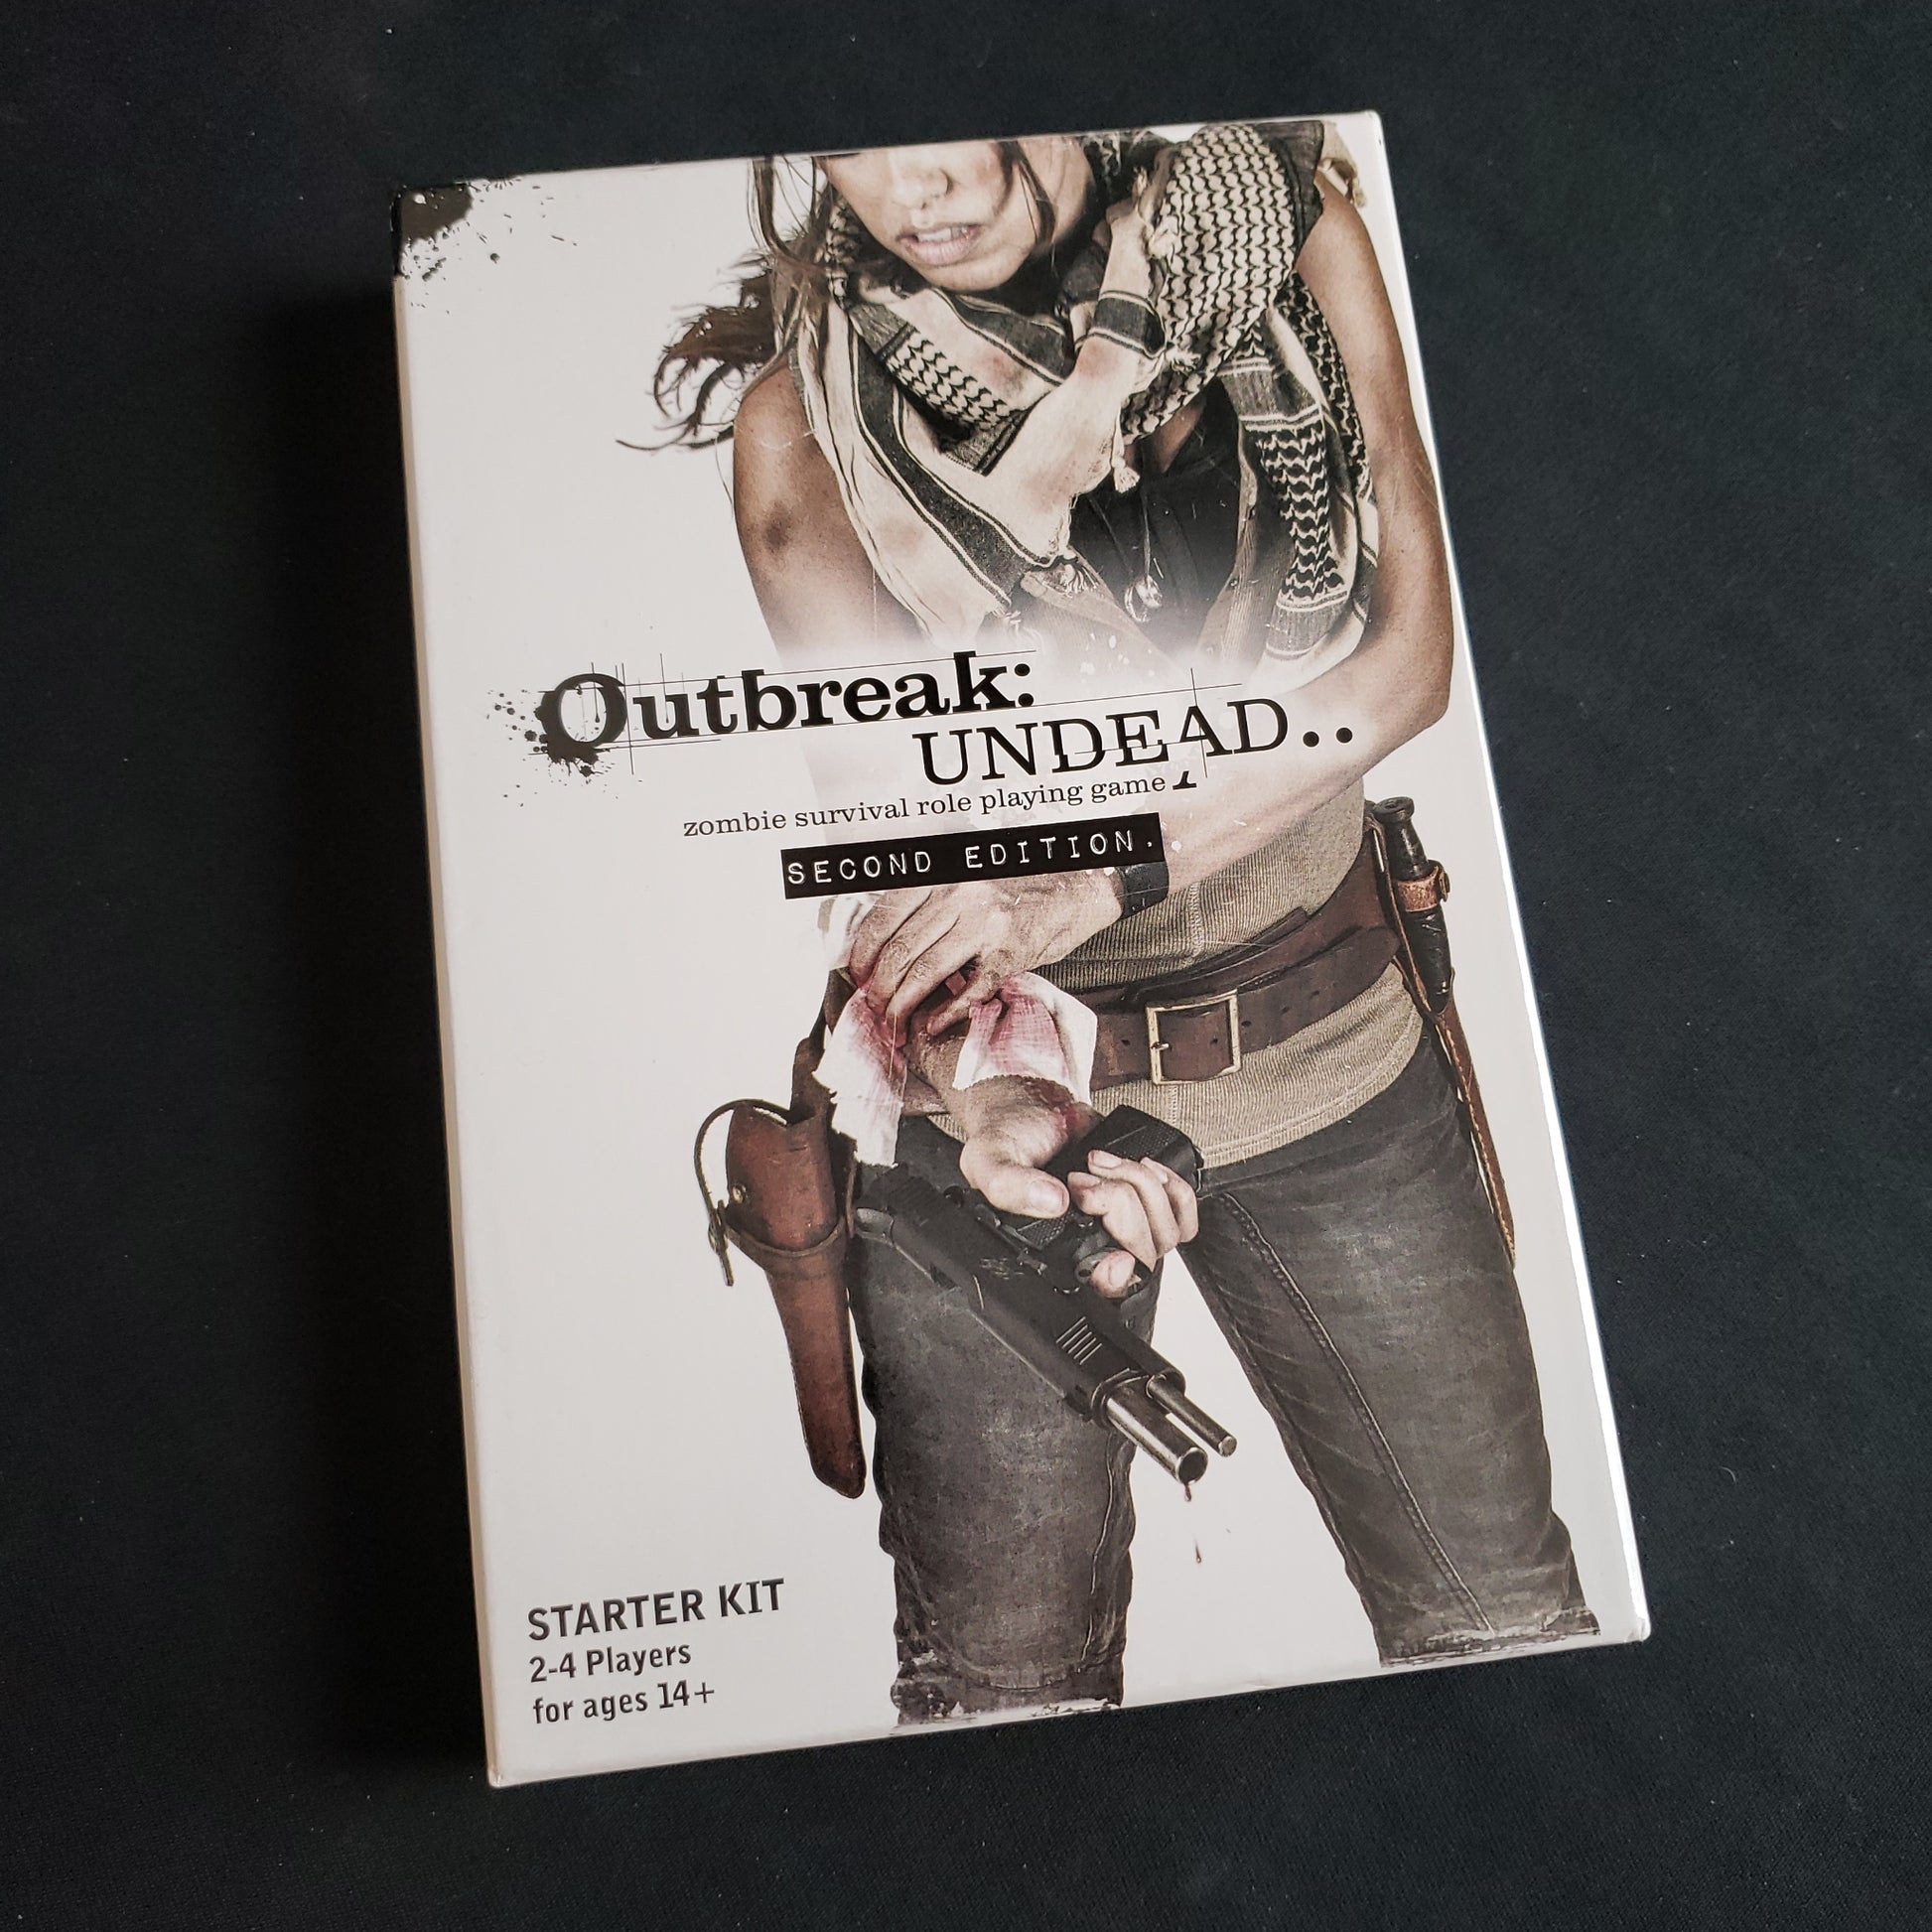 Image shows the front cover of the box of the second edition Starter Kit for the Outbreak: Undead roleplaying game